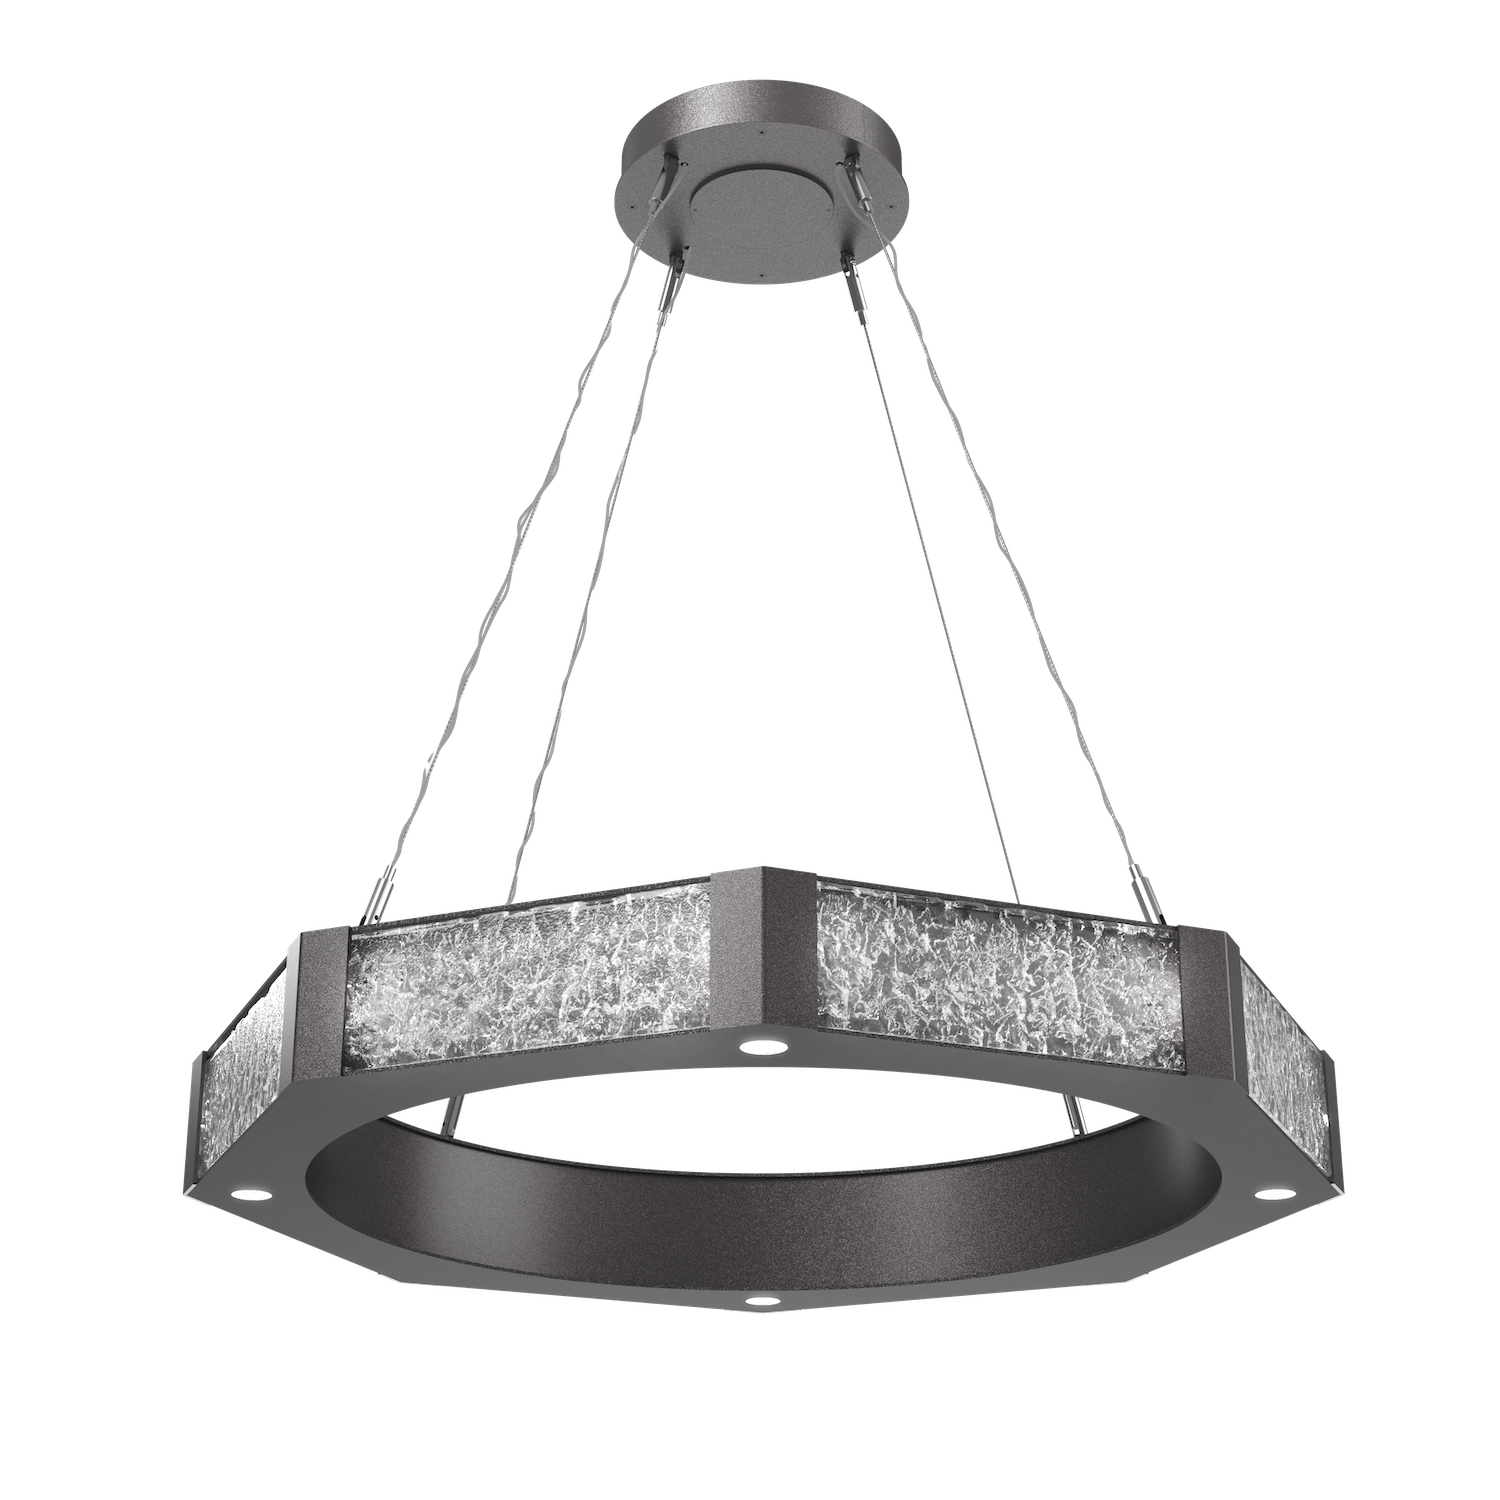 CHB0061-36-GP-GC-Hammerton-Studio-Glacier-36-inch-ring-chandelier-with-graphite-finish-and-clear-blown-glass-with-geo-clear-cast-glass-diffusers-and-LED-lamping